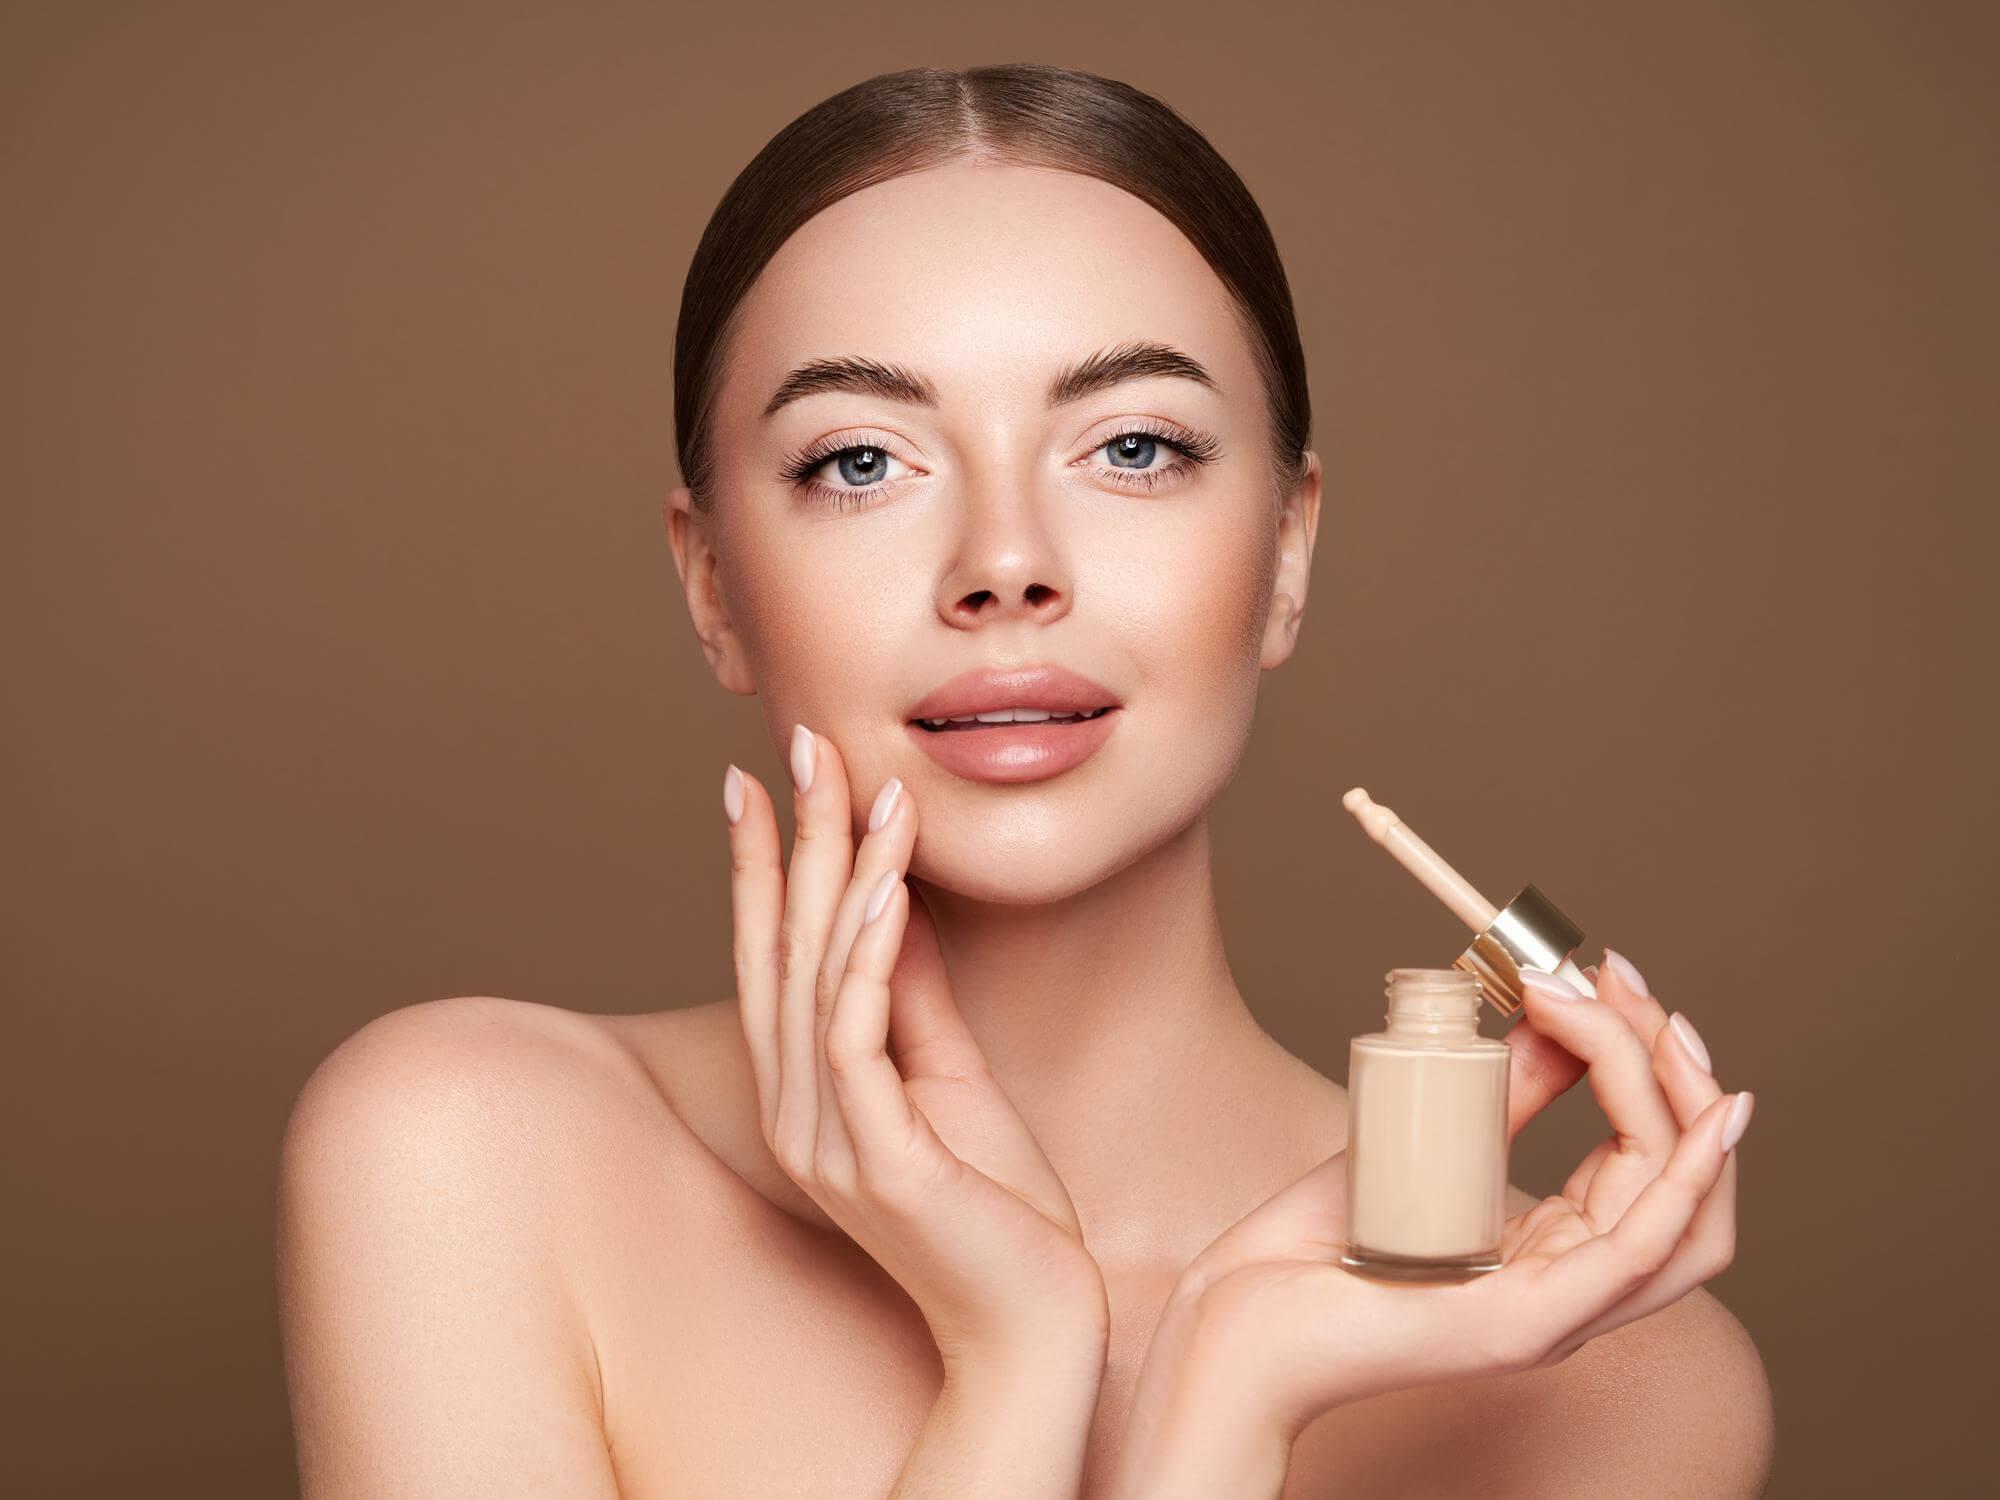 8 Best Foundation for Dry Skin to Avoid a Cakey Look